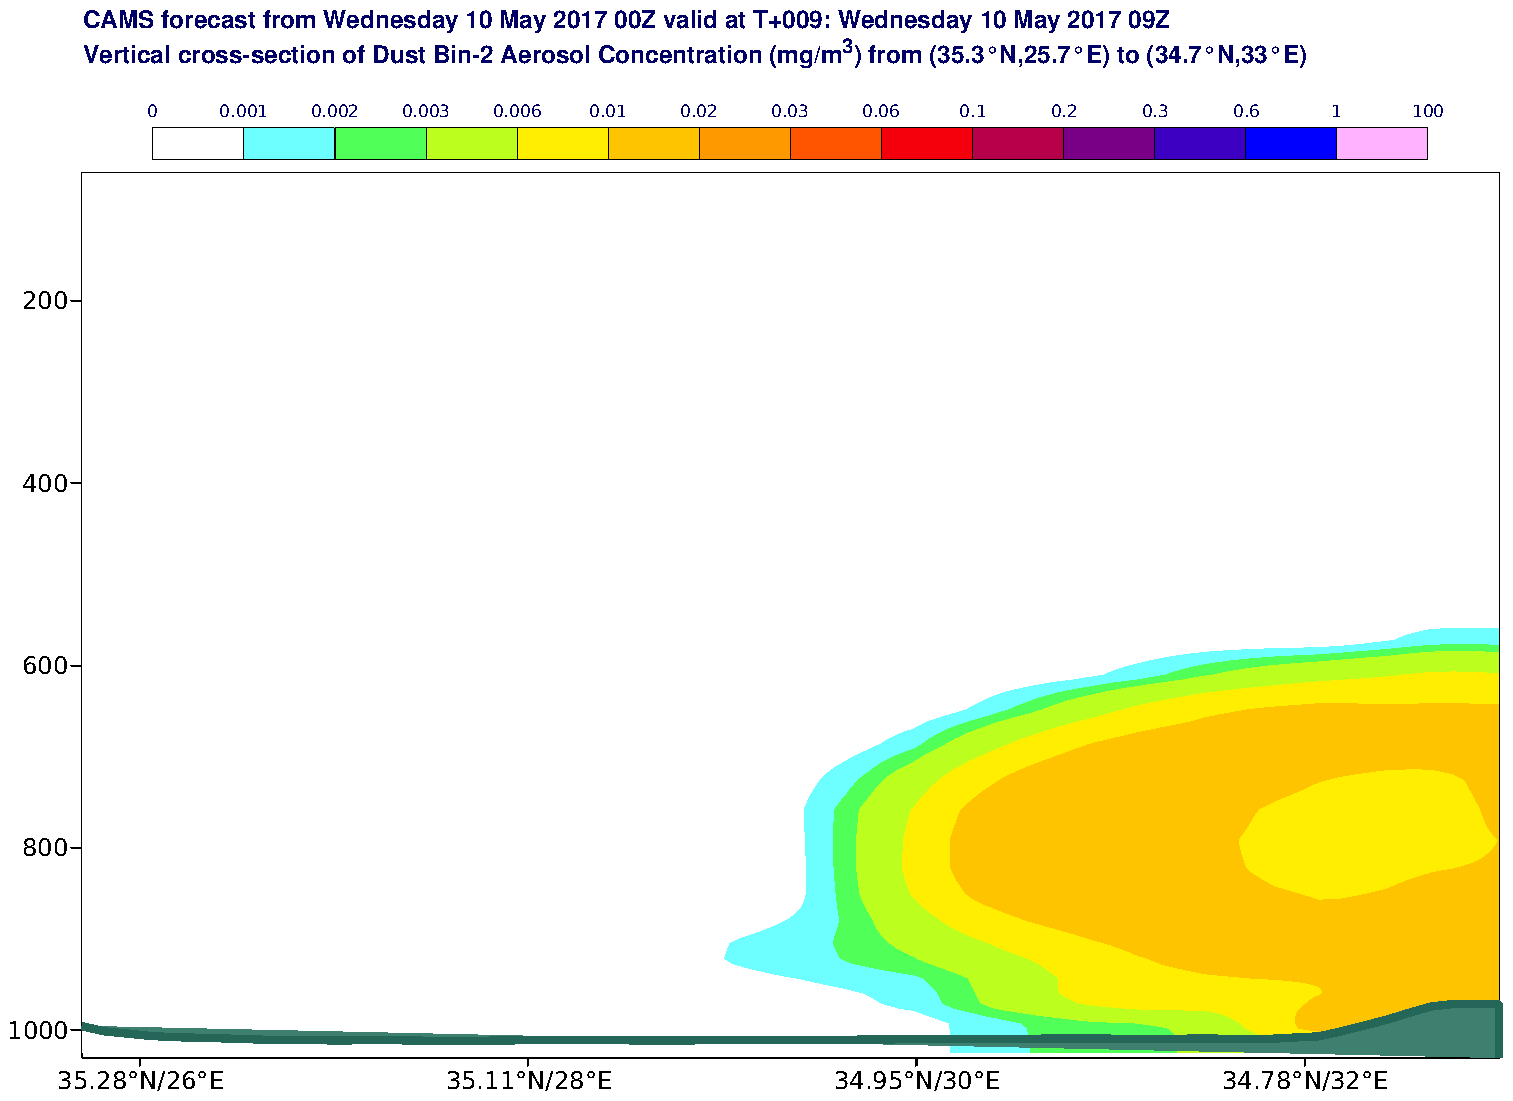 Vertical cross-section of Dust Bin-2 Aerosol Concentration (mg/m3) valid at T9 - 2017-05-10 09:00